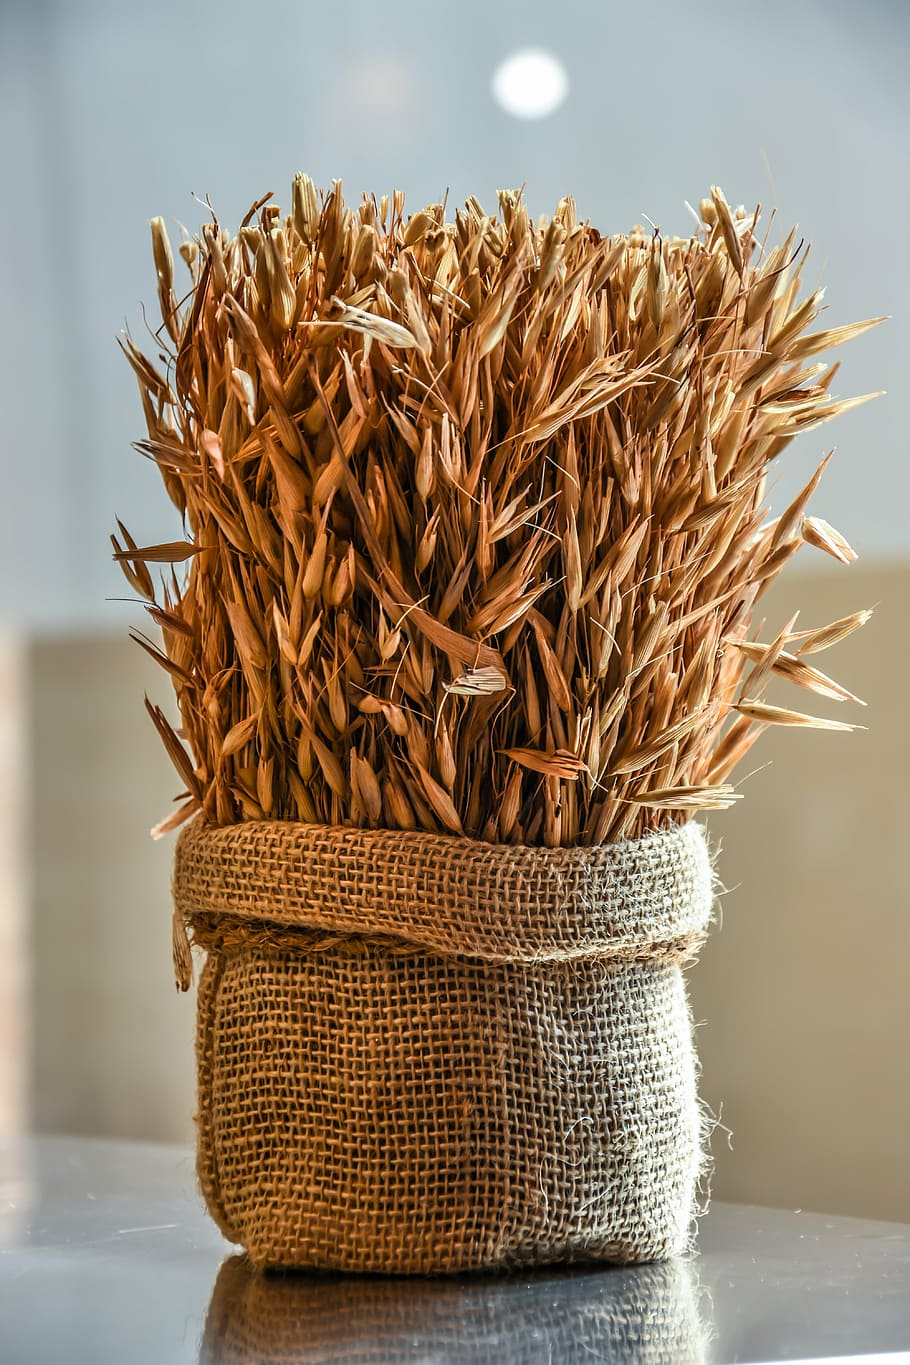 bag of paddy, wheat, grain, agriculture, harvest, food, seed, bread, cereal, plant